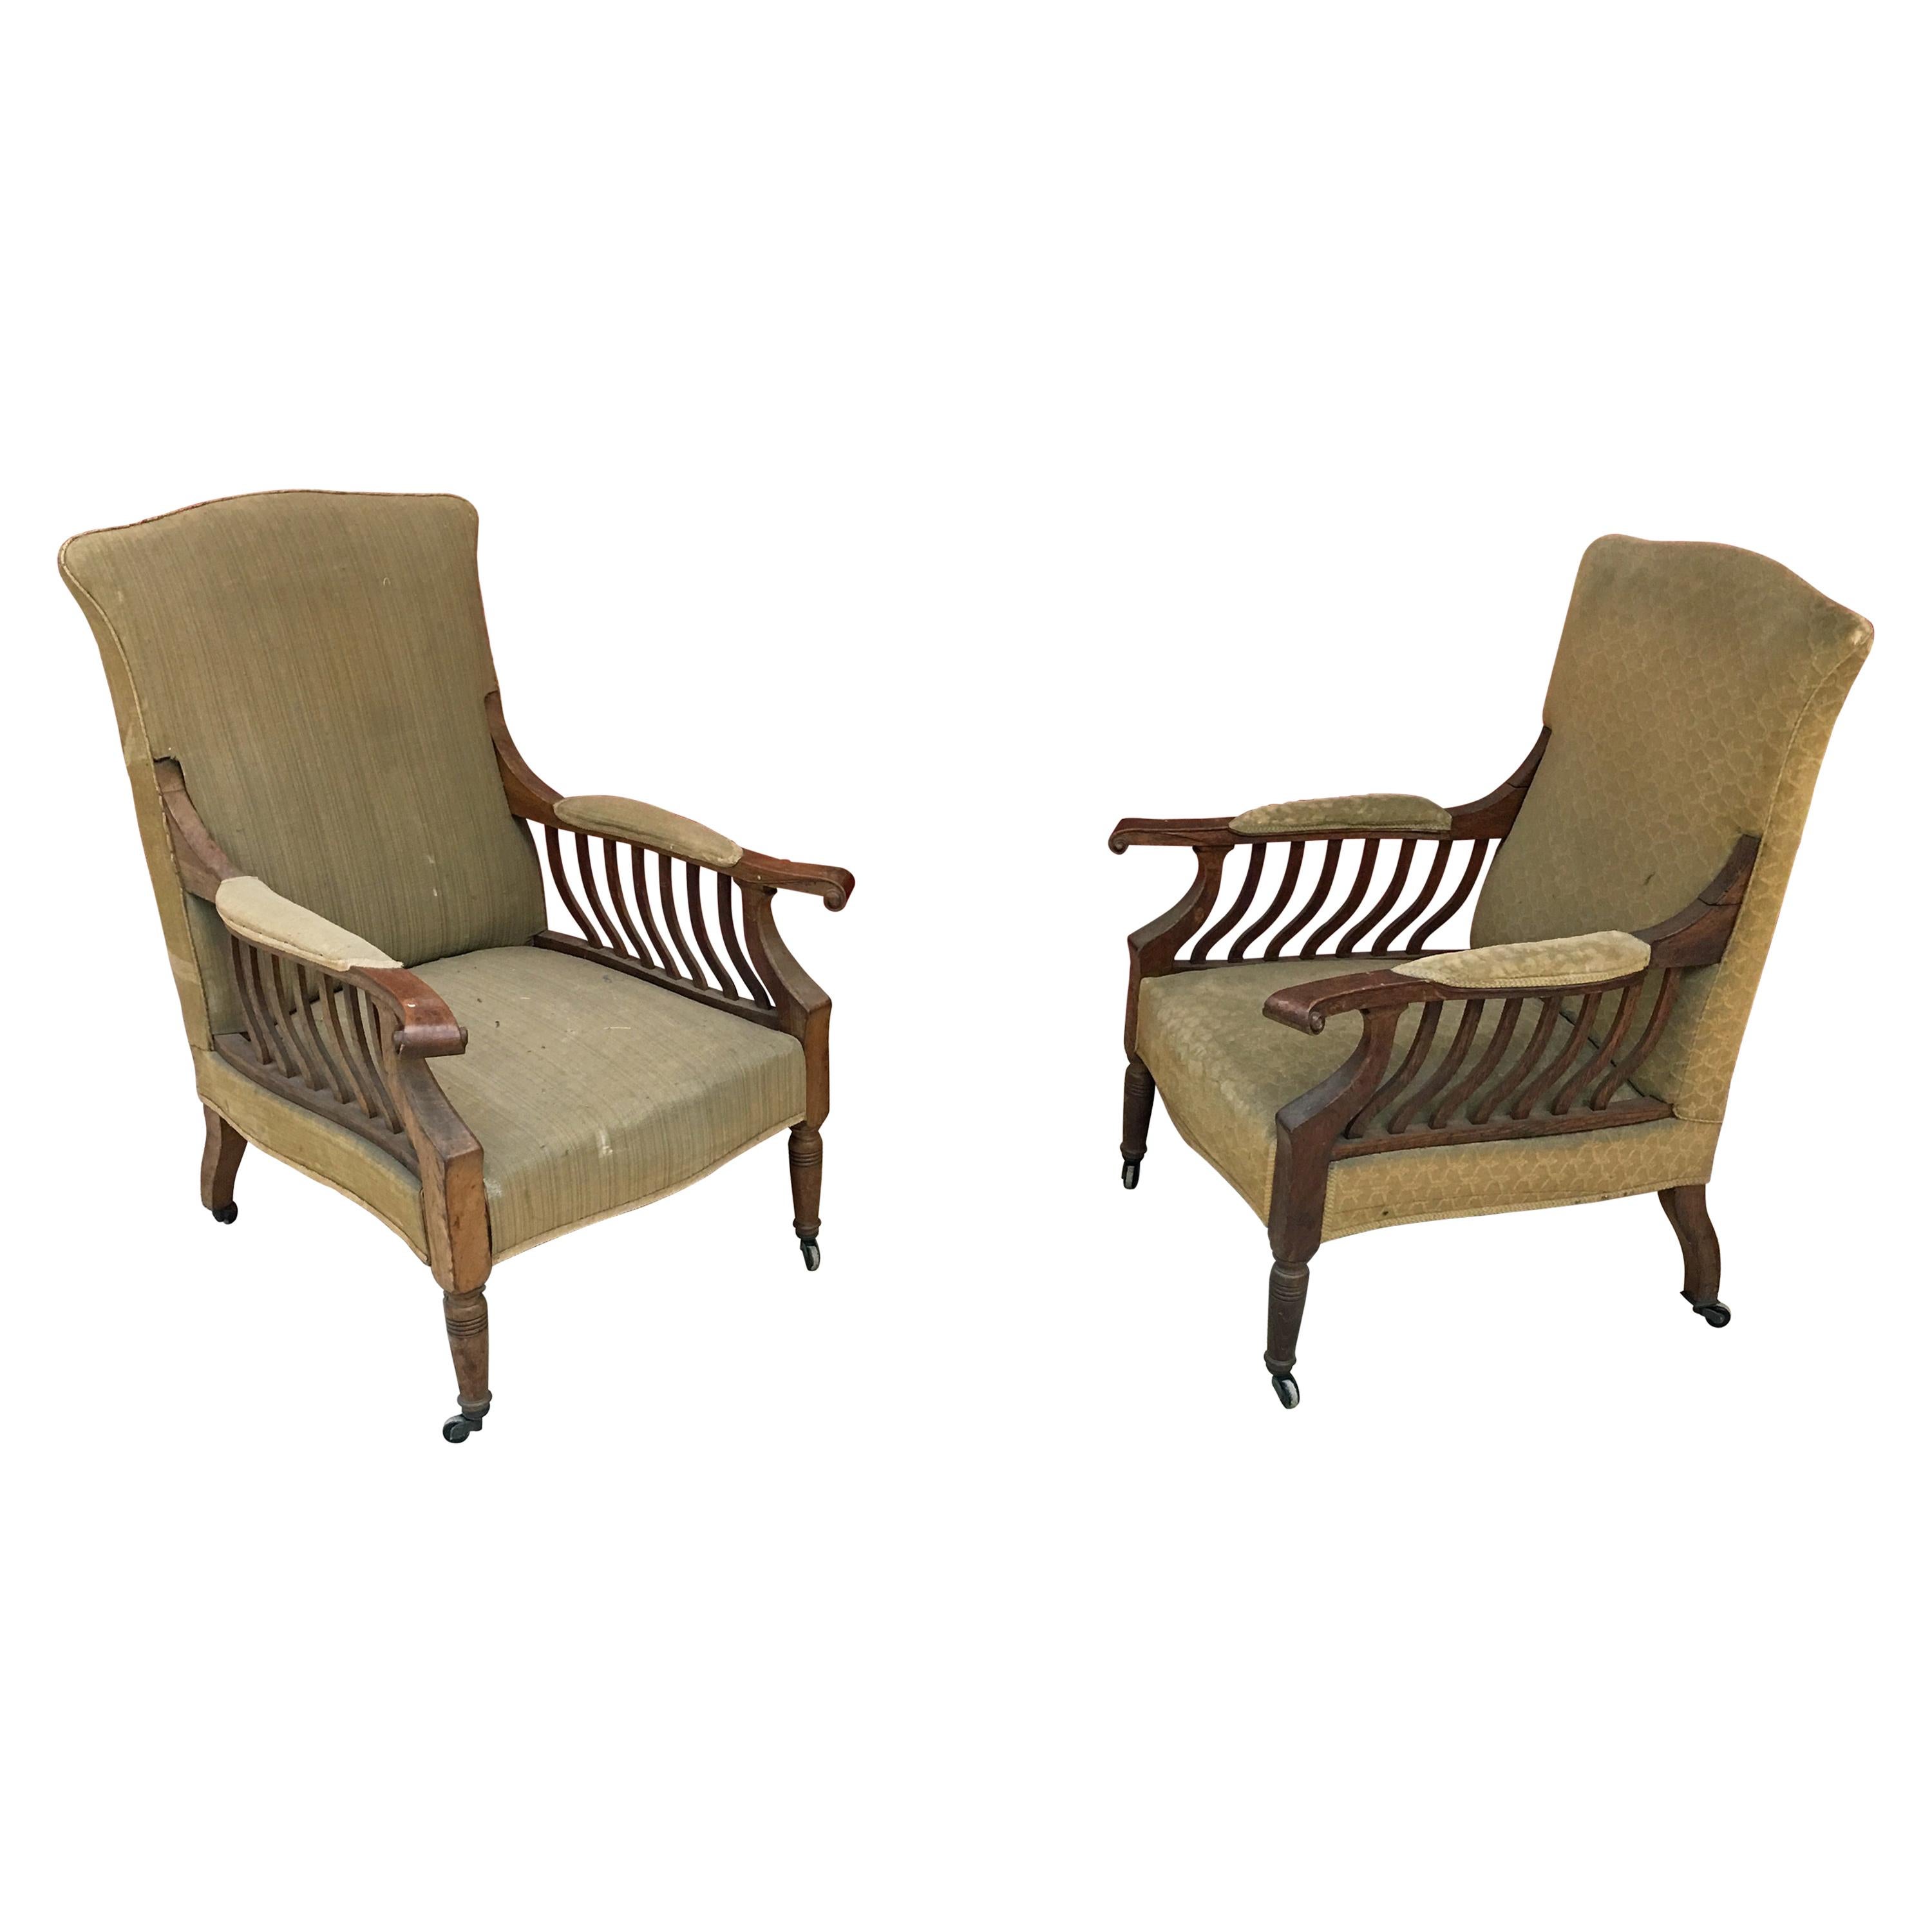 Pair of Mahogany Armchairs Arts & Crafts, circa 1900 For Sale